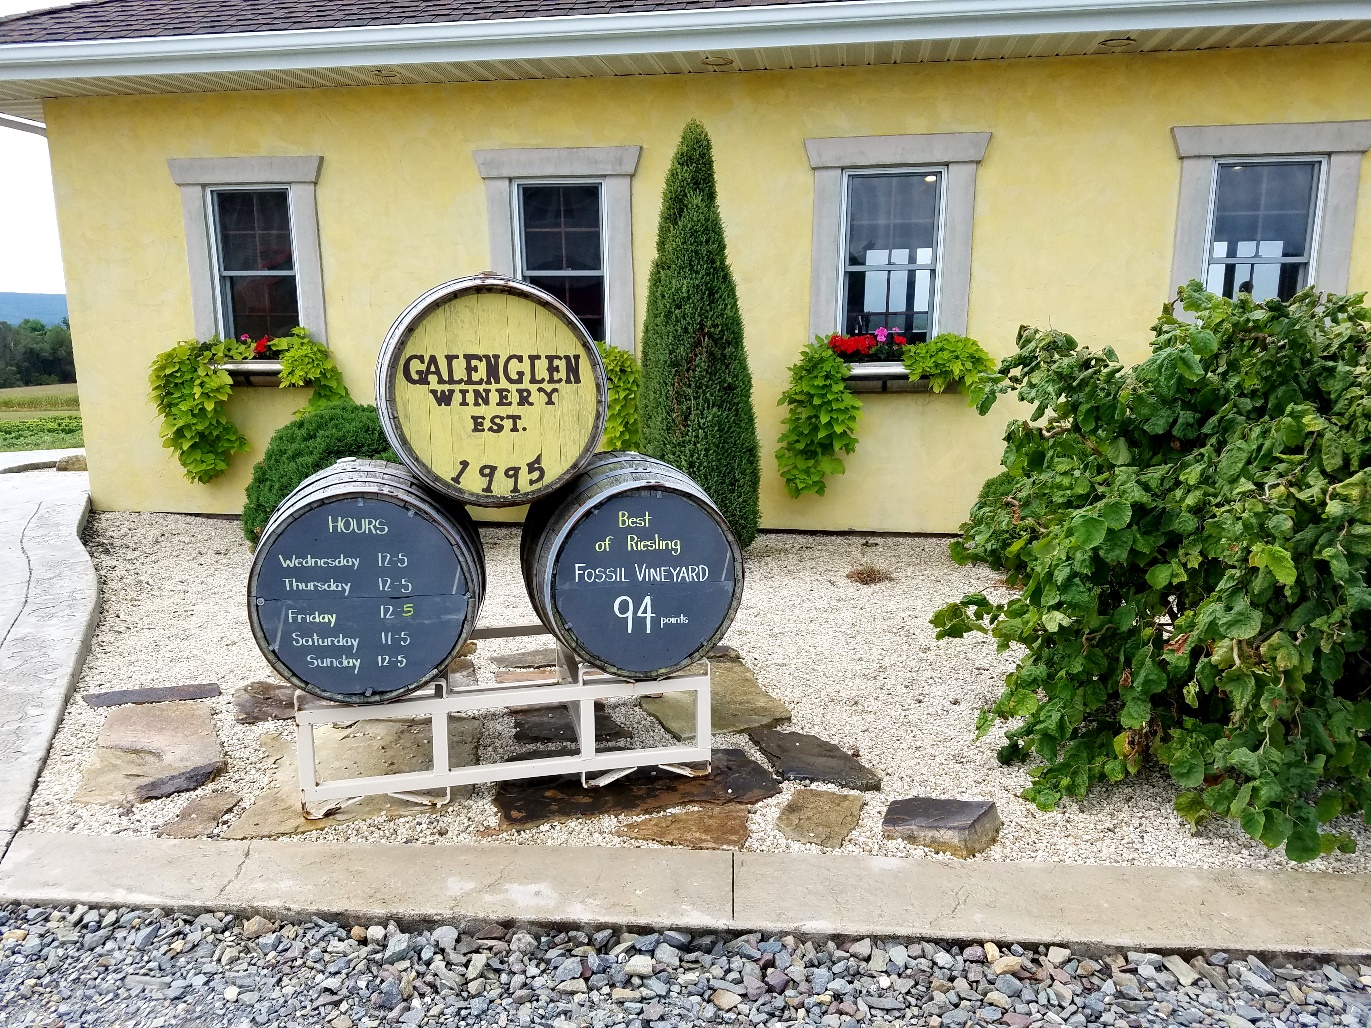 Galen Glen Winery – Perfecting the Art of Making White Wine in Lehigh Valley, Pennsylvania